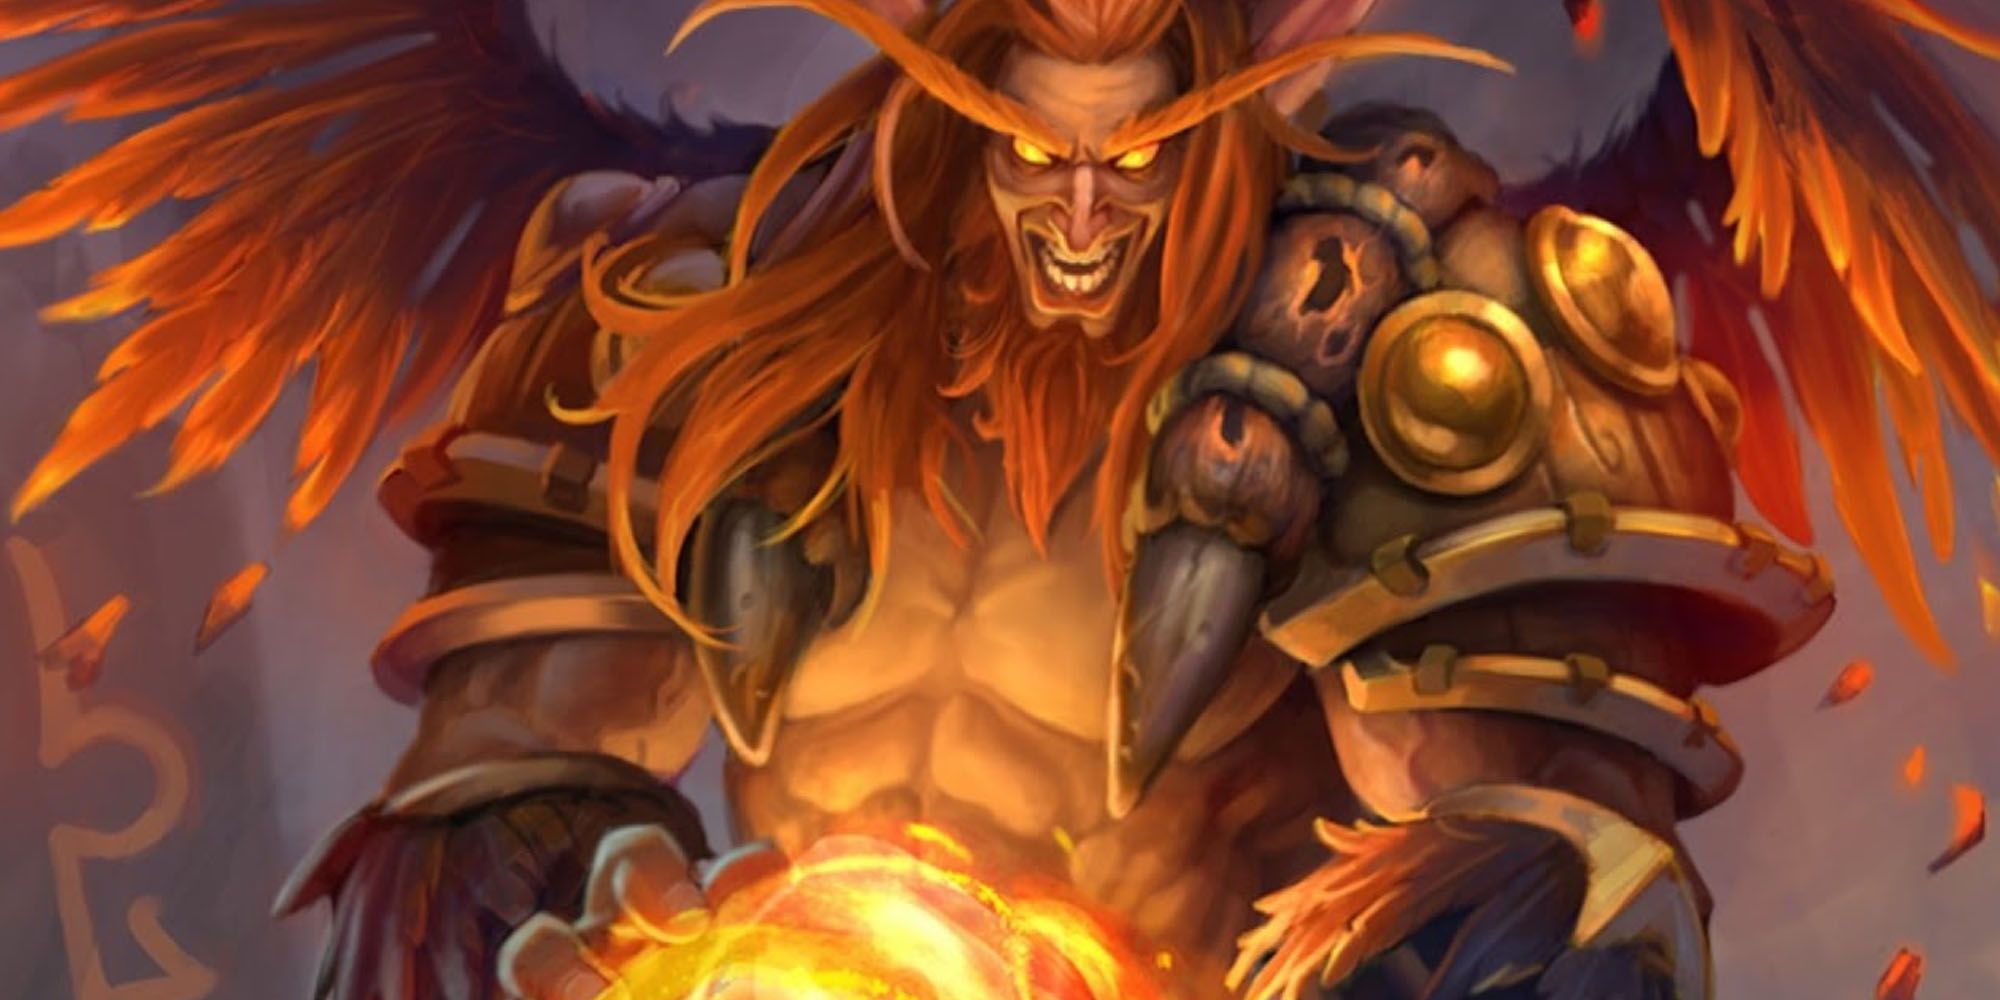 A Wildfire Druid begins to form a fireball in his hands